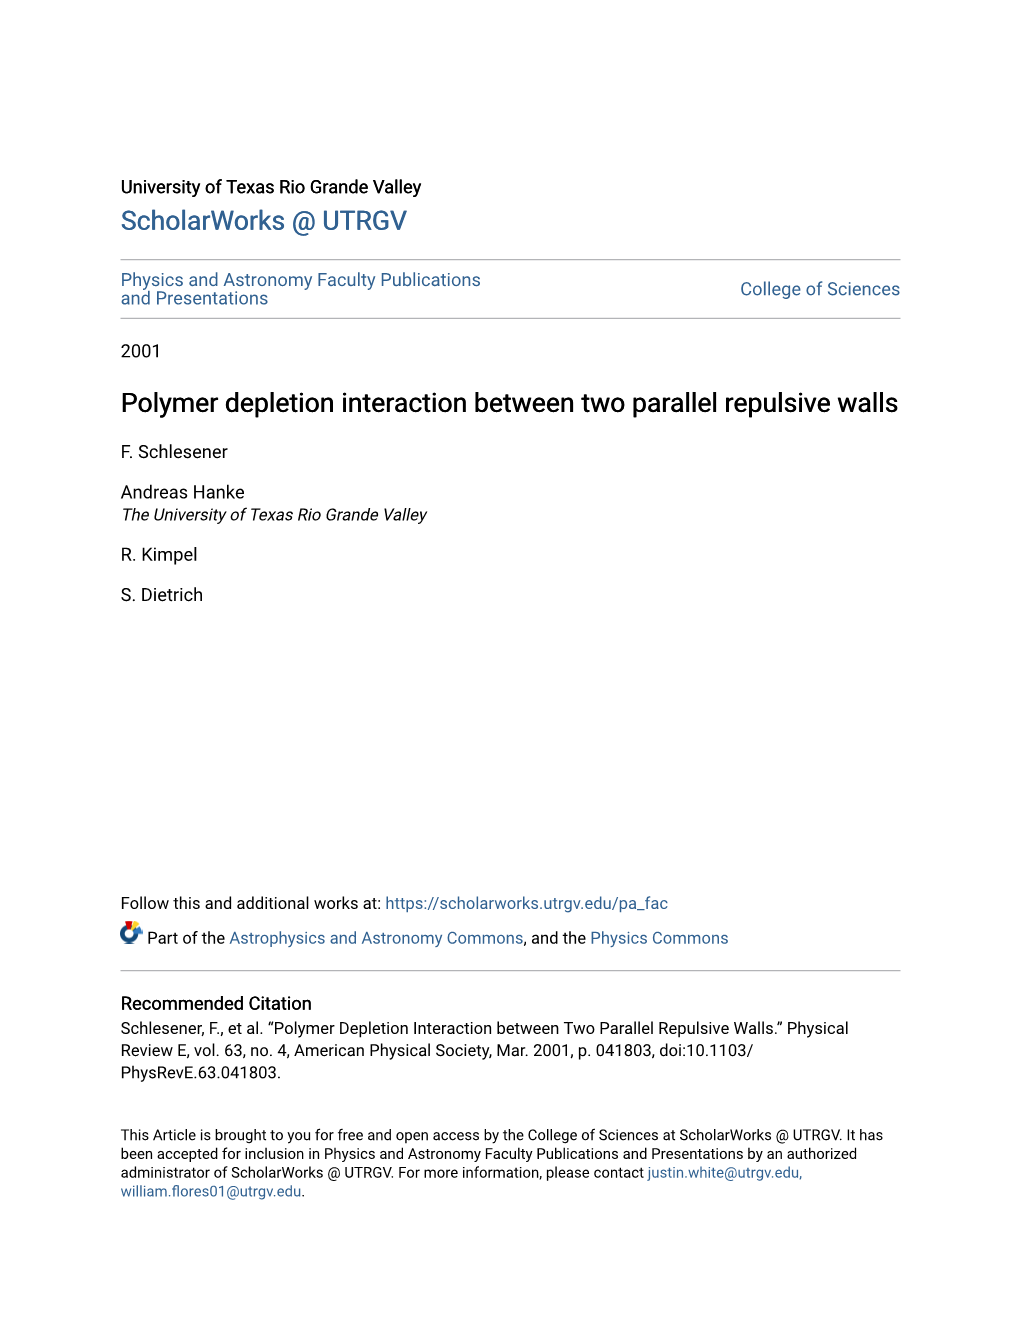 Polymer Depletion Interaction Between Two Parallel Repulsive Walls